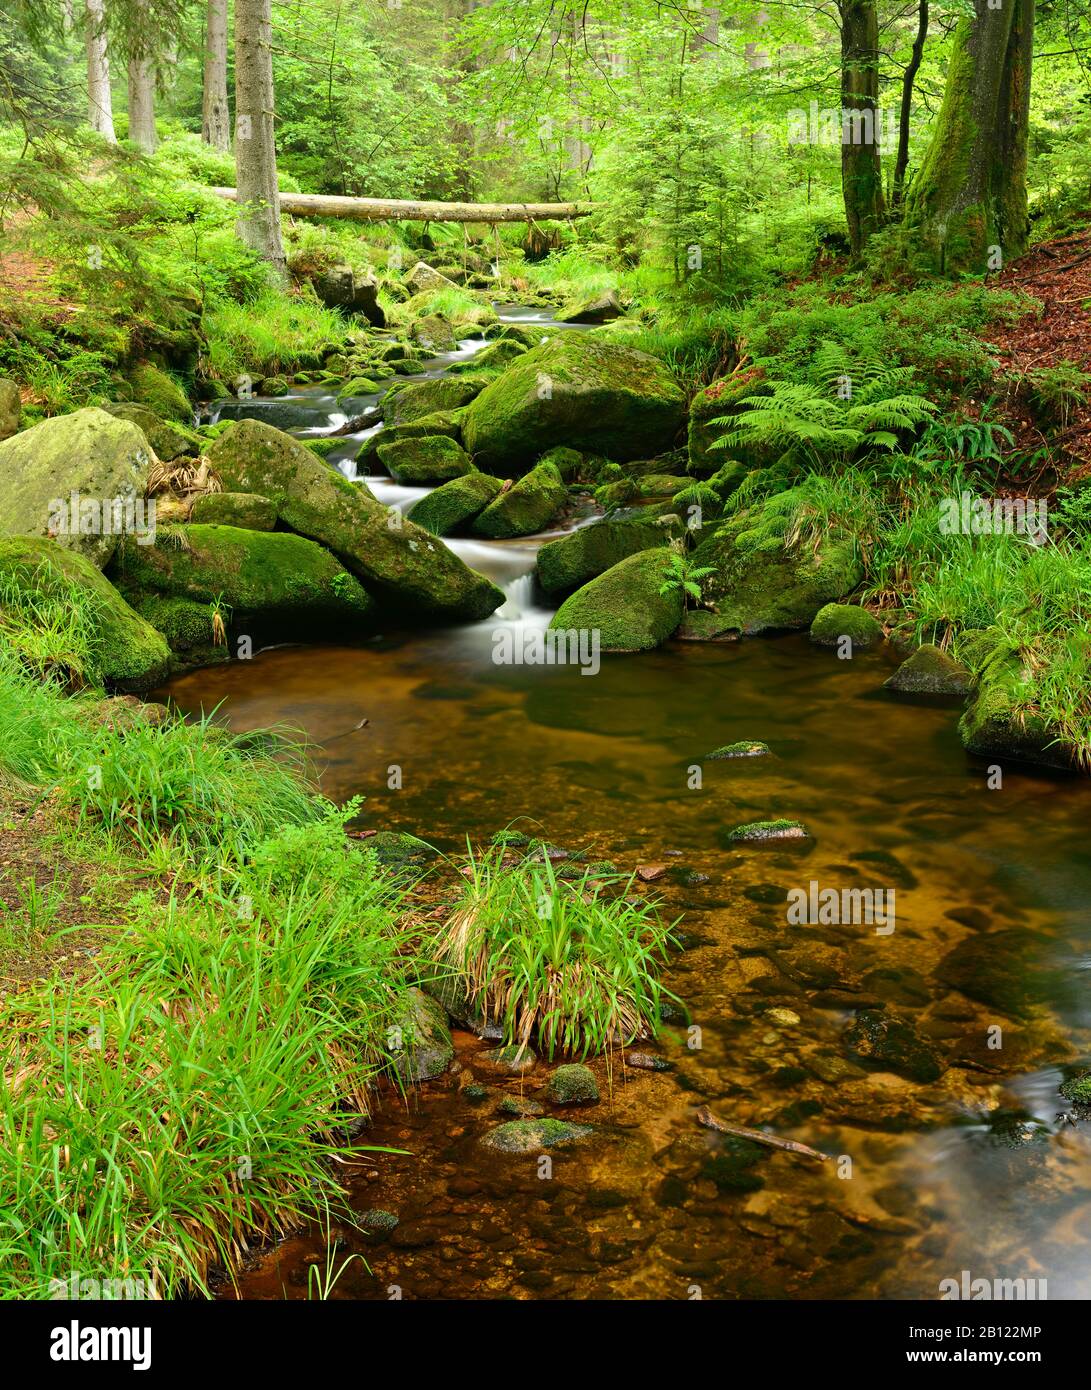 At the upper reaches of the Bode, Bergbach, boulders covered with moss in the Harz Mountains, near Braunlage, Lower Saxony, Germany Stock Photo